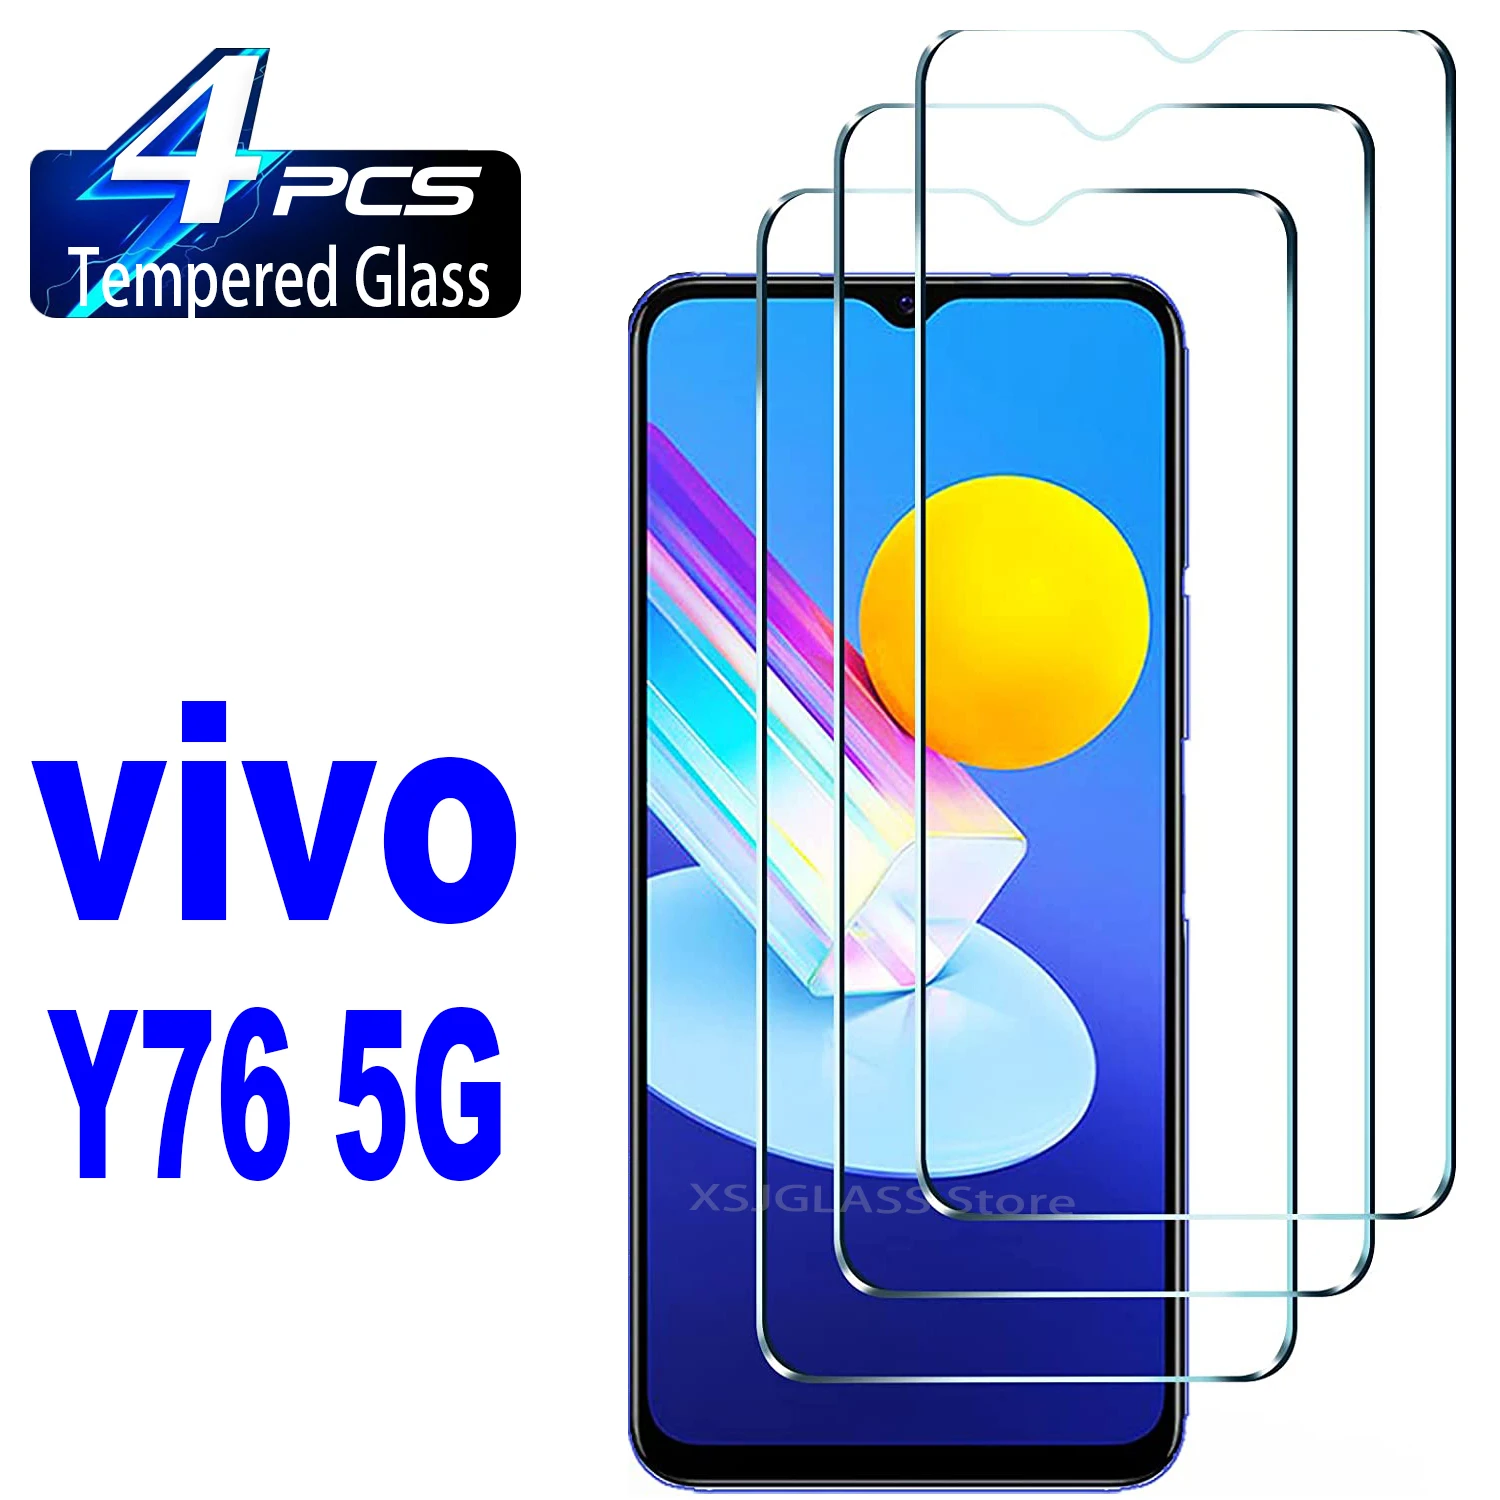 2/4Pcs Tempered Glass For Vivo Y76 5G Screen Protector Glass Film 2 4pcs screen protector glass for vivo y21s y21 y21t y21e y21a y21g tempered glass film